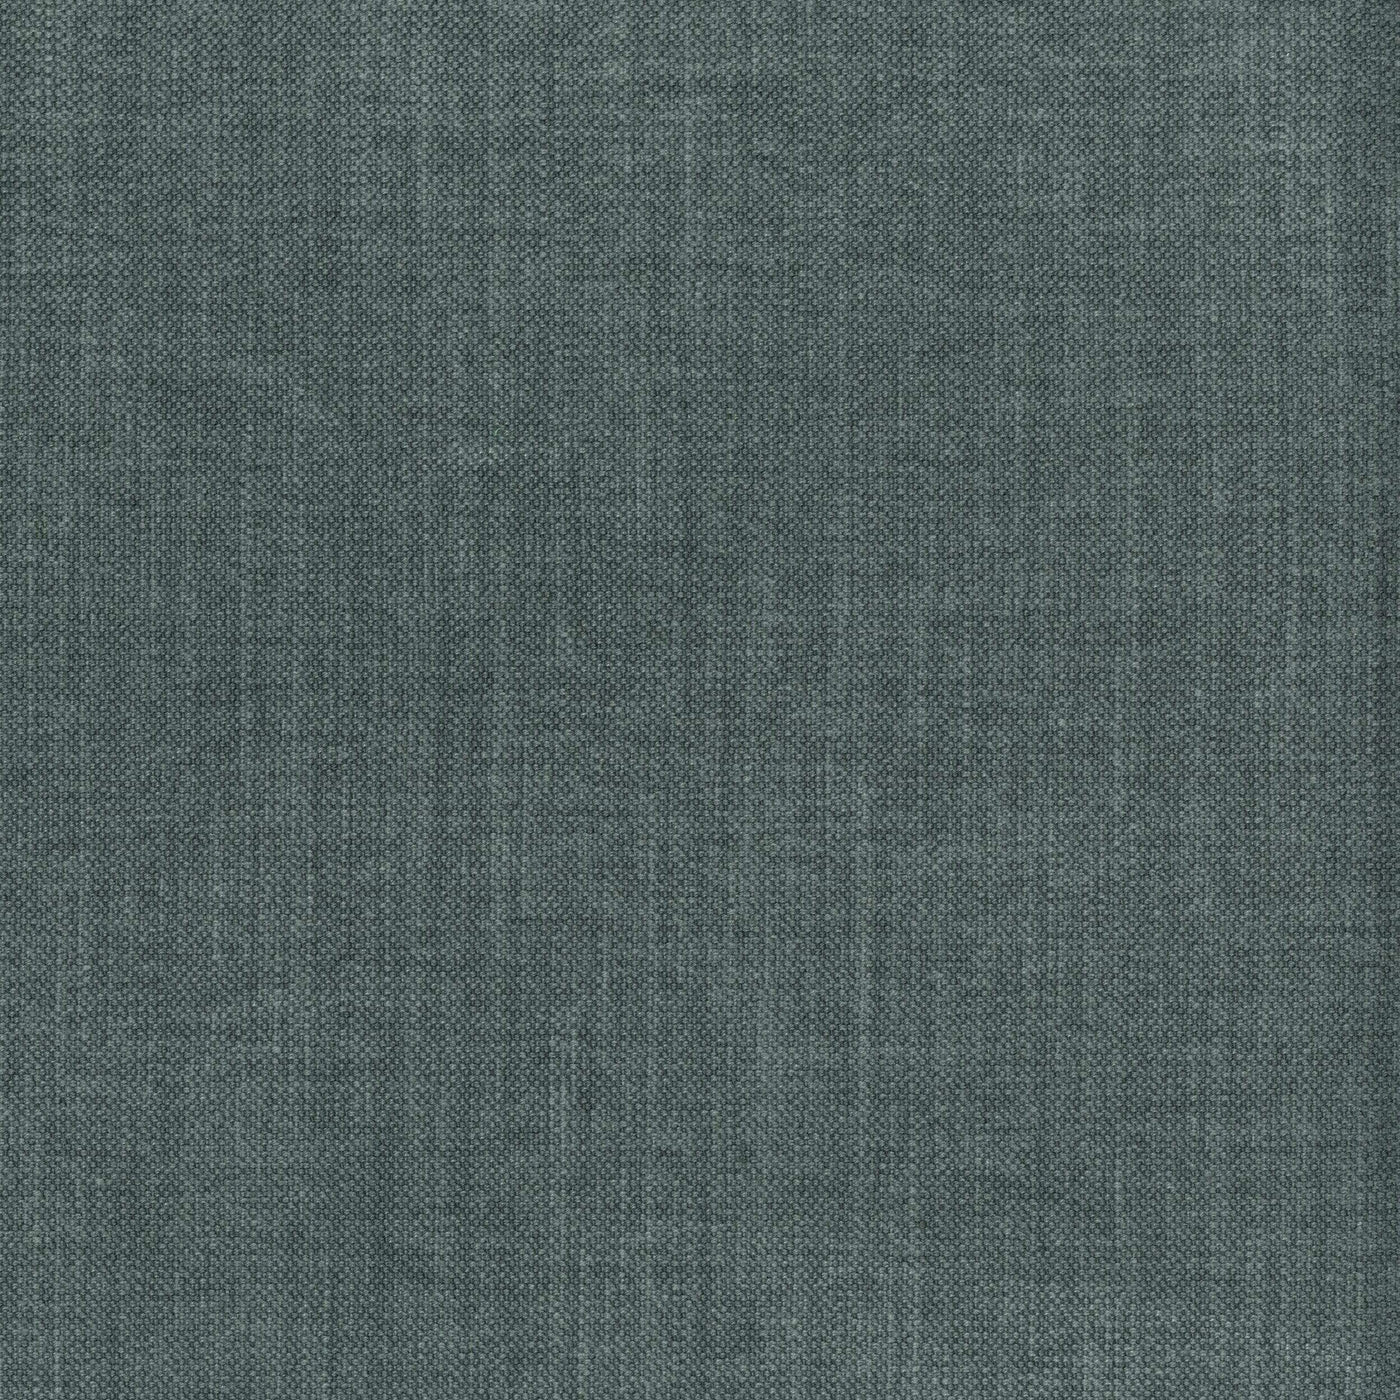 Pure 02 grey upholstery fabric made to order for someday designs Toft sofas. Order free fabric swatches at someday designs. 